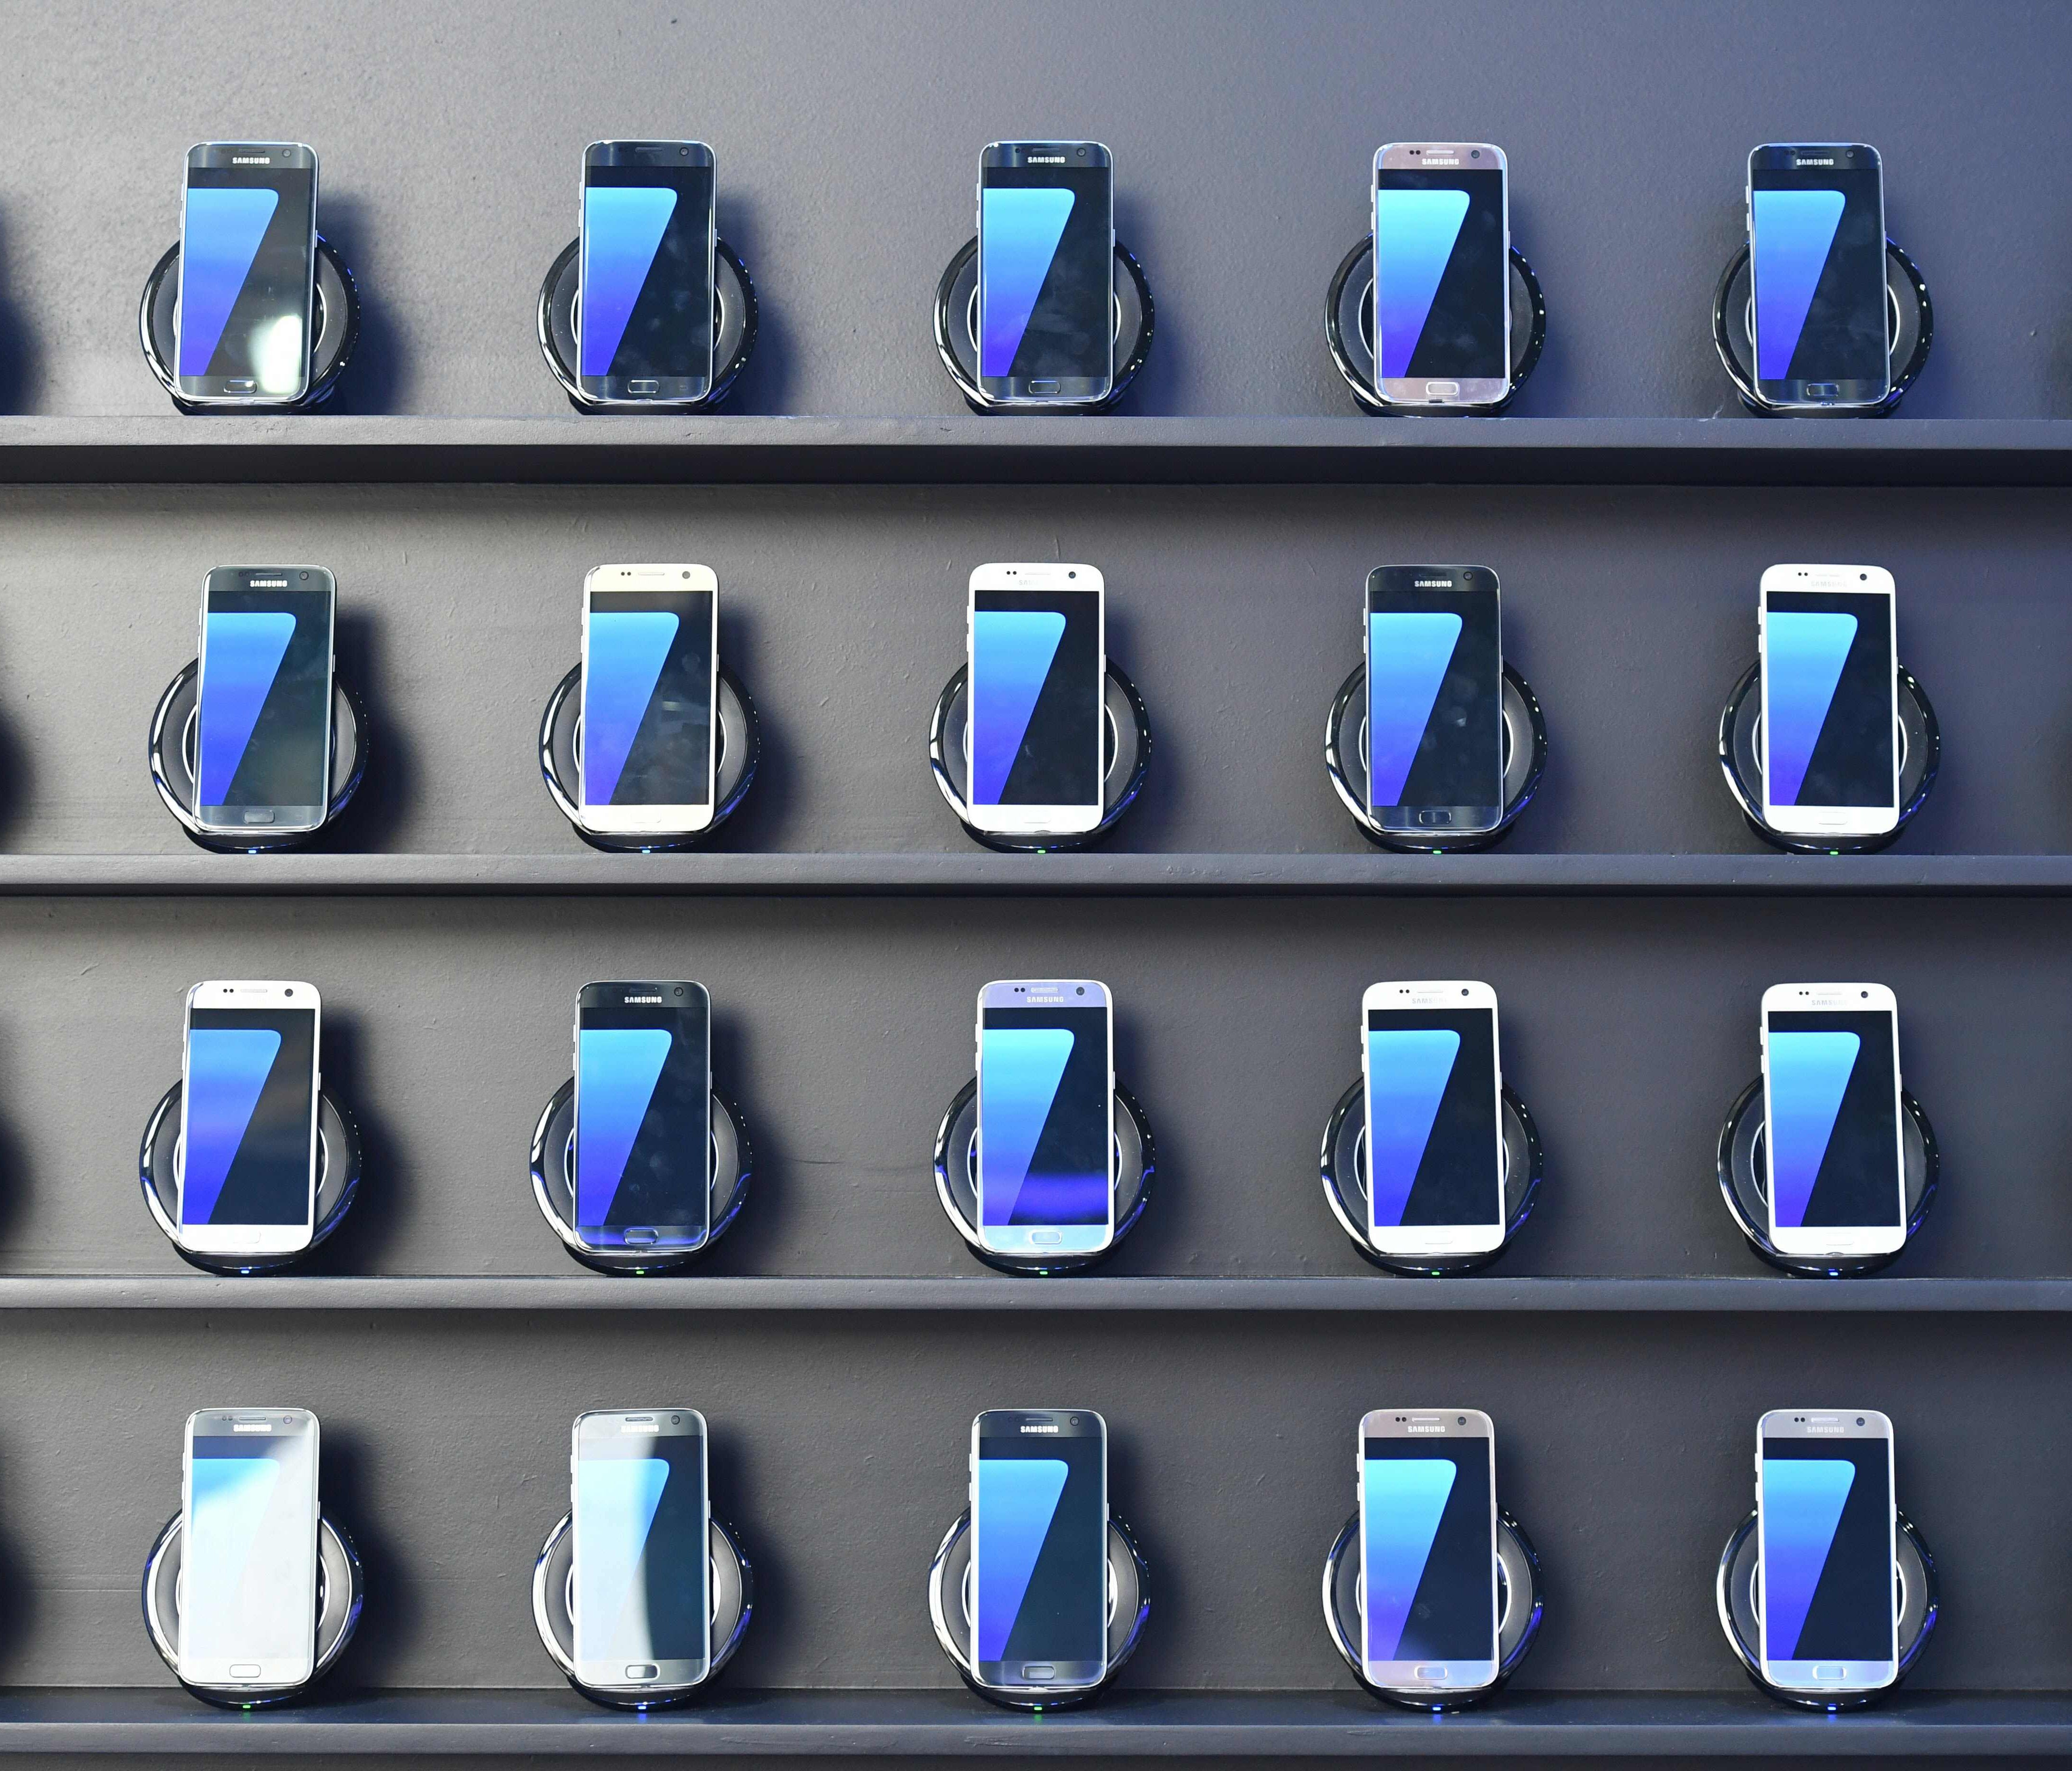 Samsung Galaxy S7 mobile devices on display at the Olympic Park in Rio de Janeiro on Aug. 2, 2016.